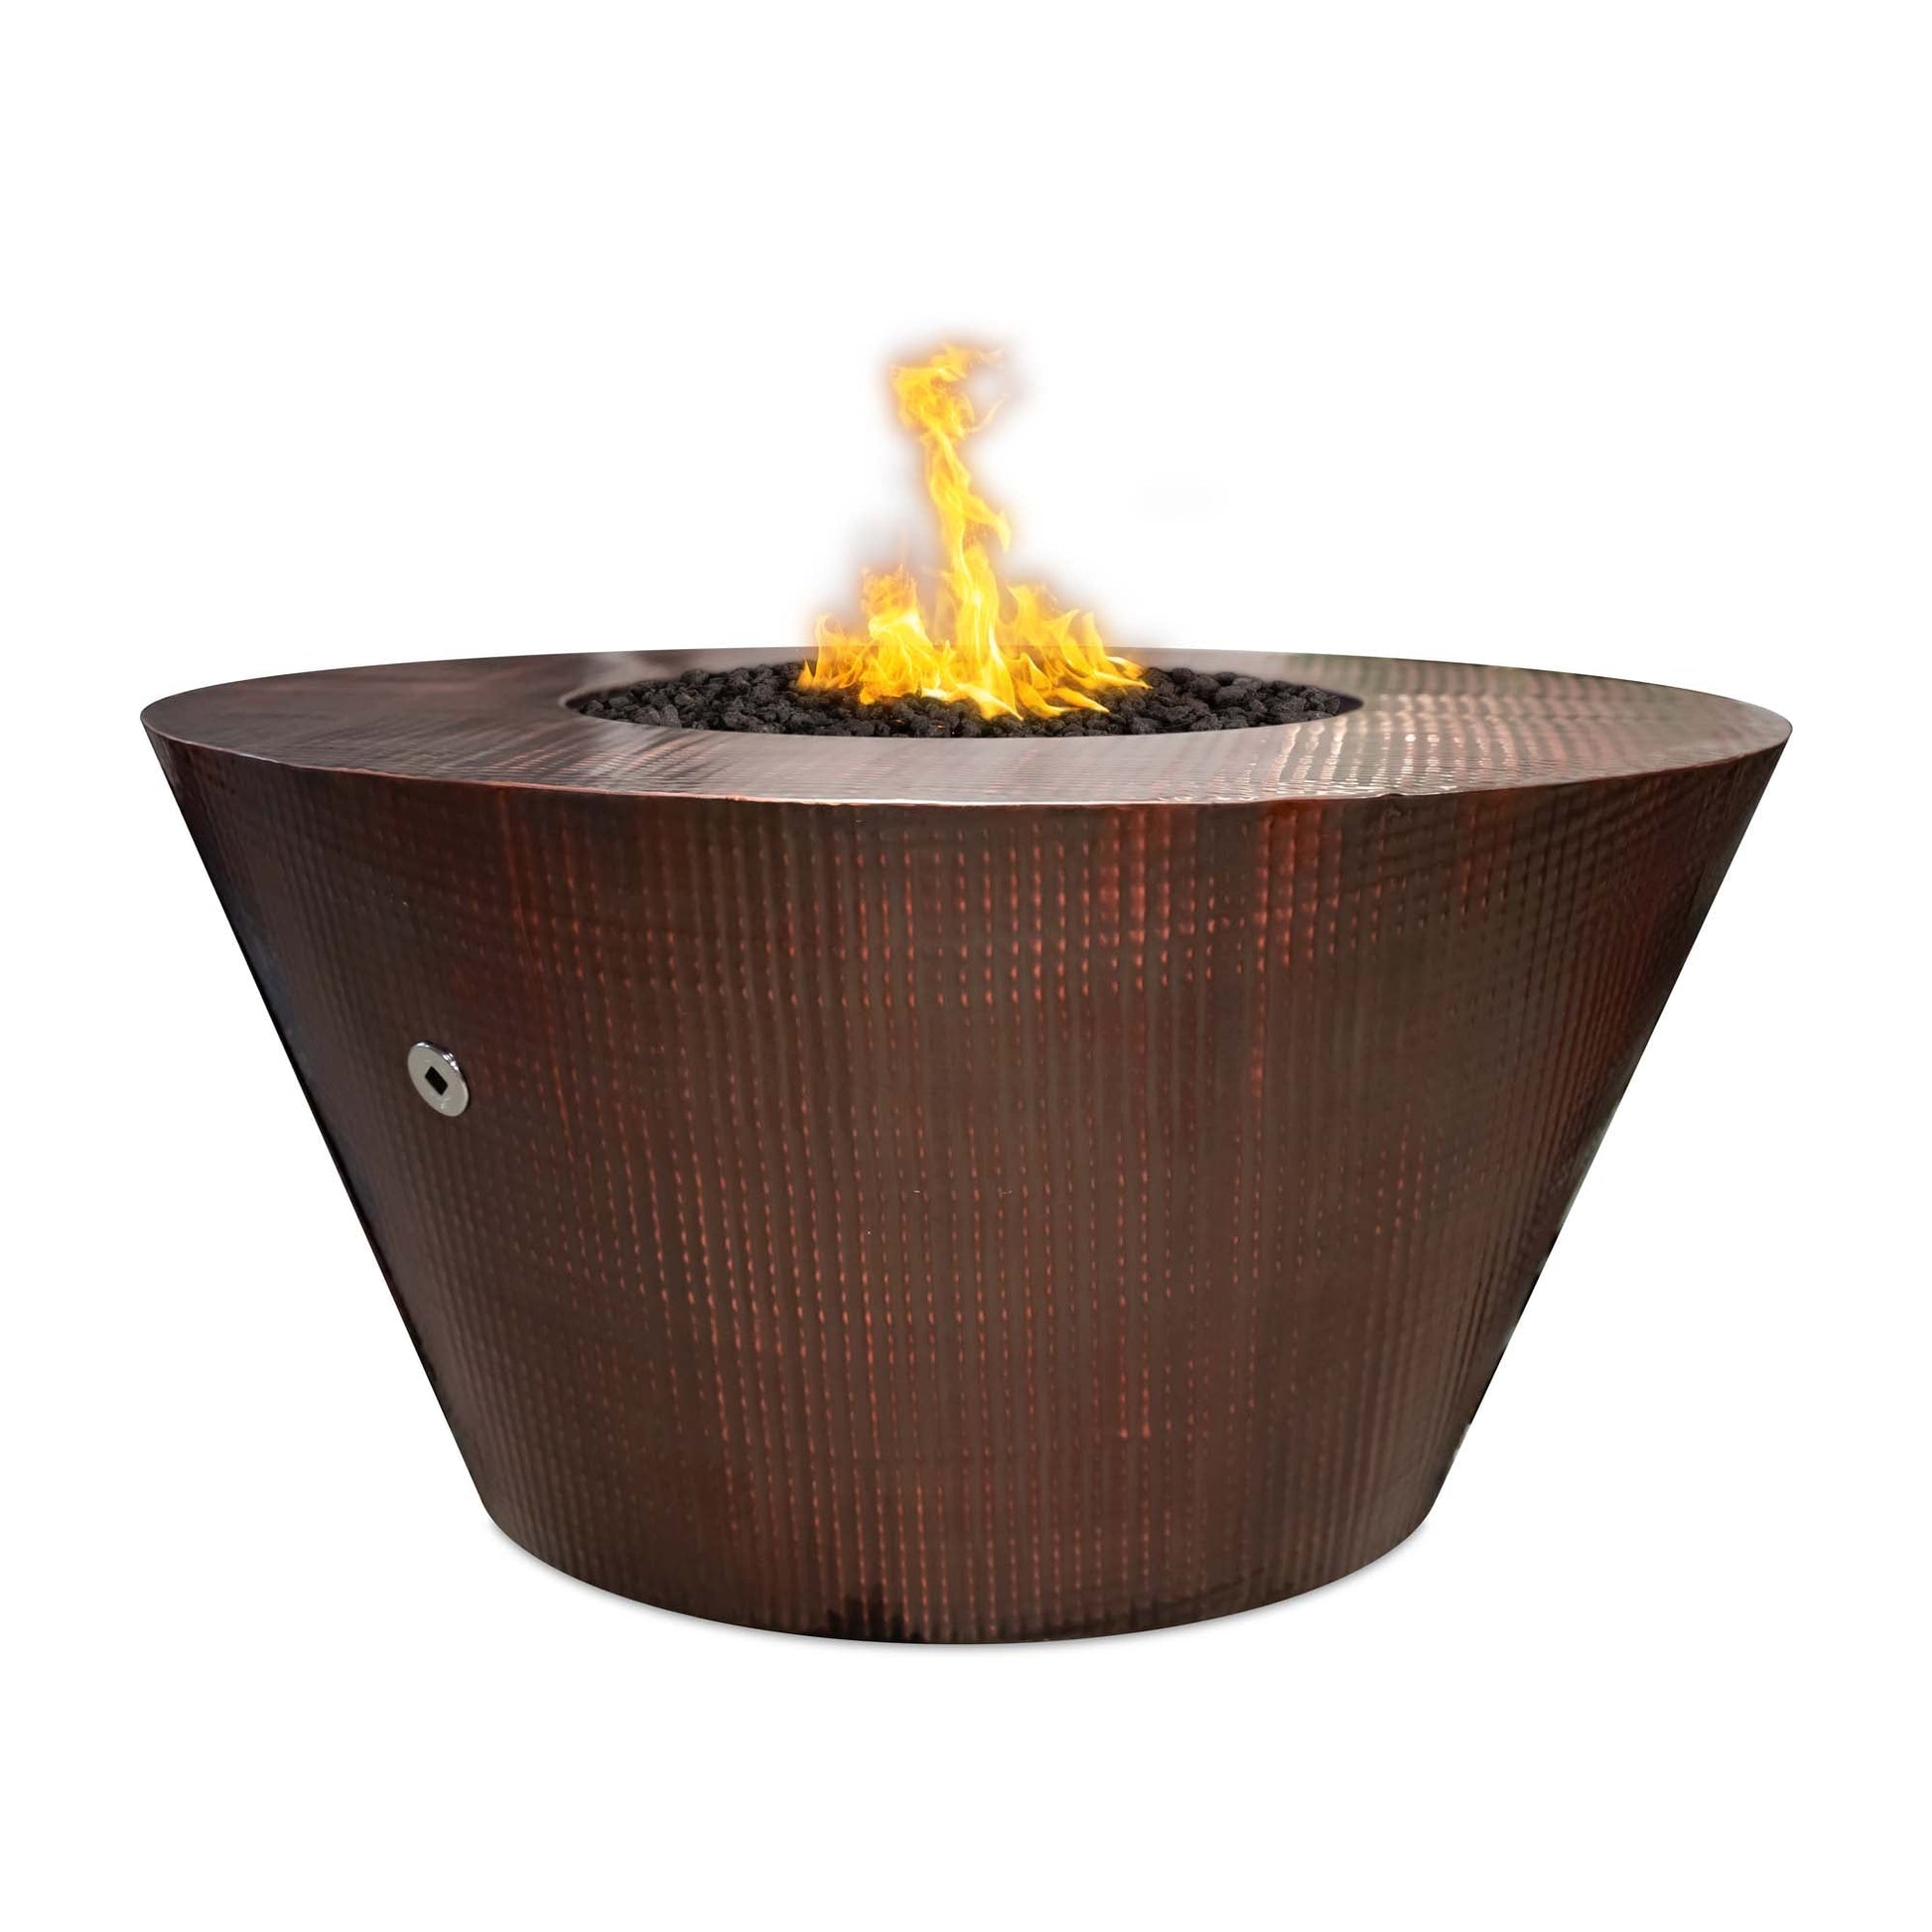 The Outdoor Plus Round Martillo 48" Stainless Steel Natural Gas Fire Pit with Match Lit Ignition